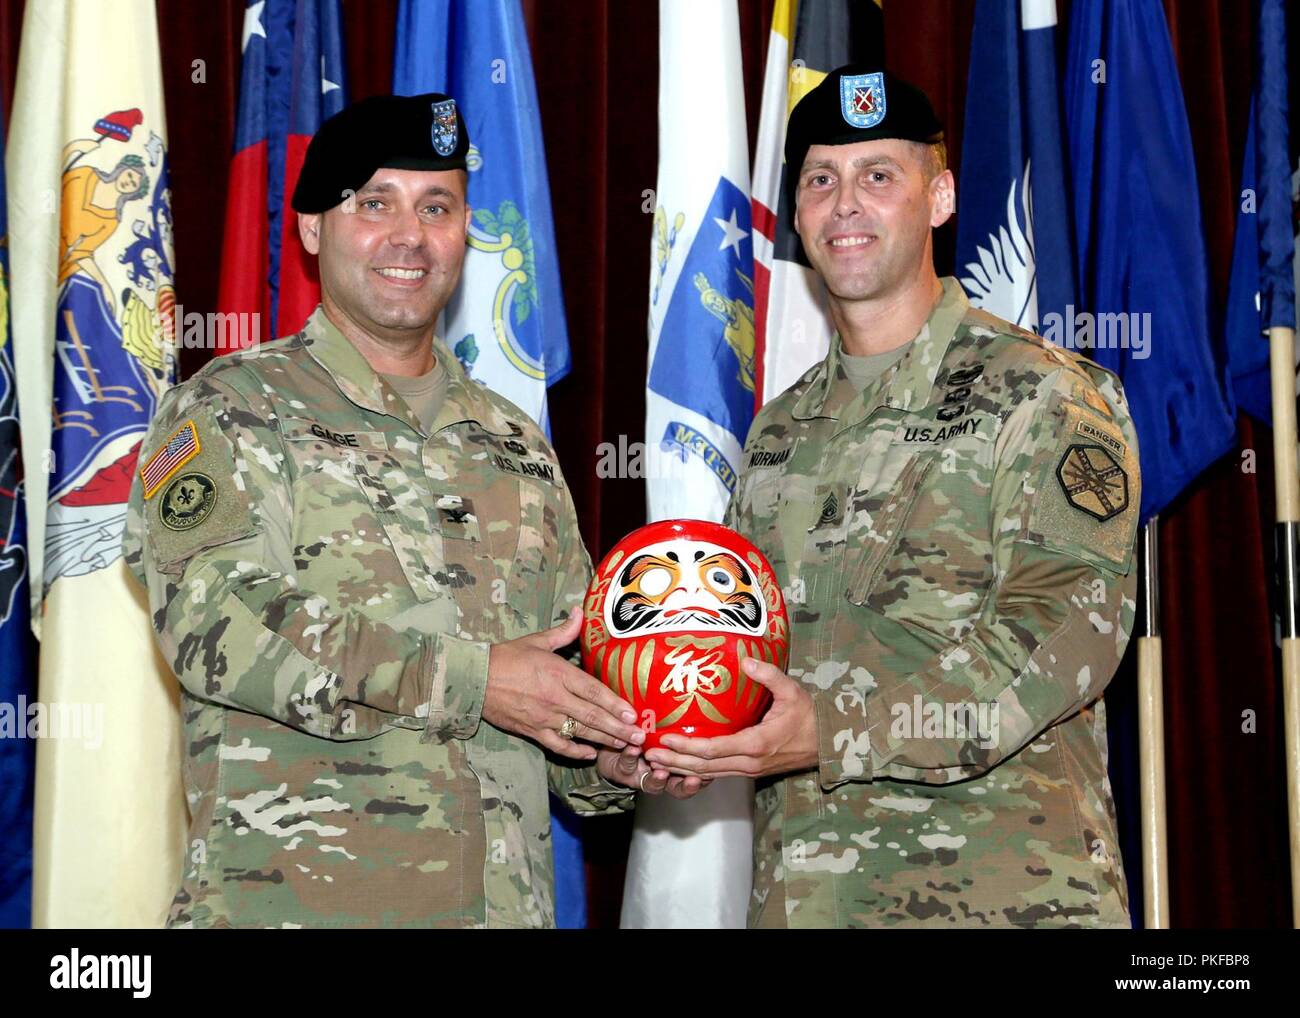 Command Sgt. Maj. Billy J. Norman, U.S. Army Garrison Japan command sergeant major and Col. Phillip K. Gage, garrison commander, present the Daruma doll to those who are present at the Aug. 10 assumption of responsibility ceremony, in the Camp Zama Community Club. Daruma, a Japanese symbol of good luck, is characterized by a weighted bottom so that it always returns to an upright position when it is tipped over. The eyes of a new Daruma are left unpainted. The person paints in one eye while praying for the fulfillment of some special wish. They then place the Daruma in the family shrine or the Stock Photo